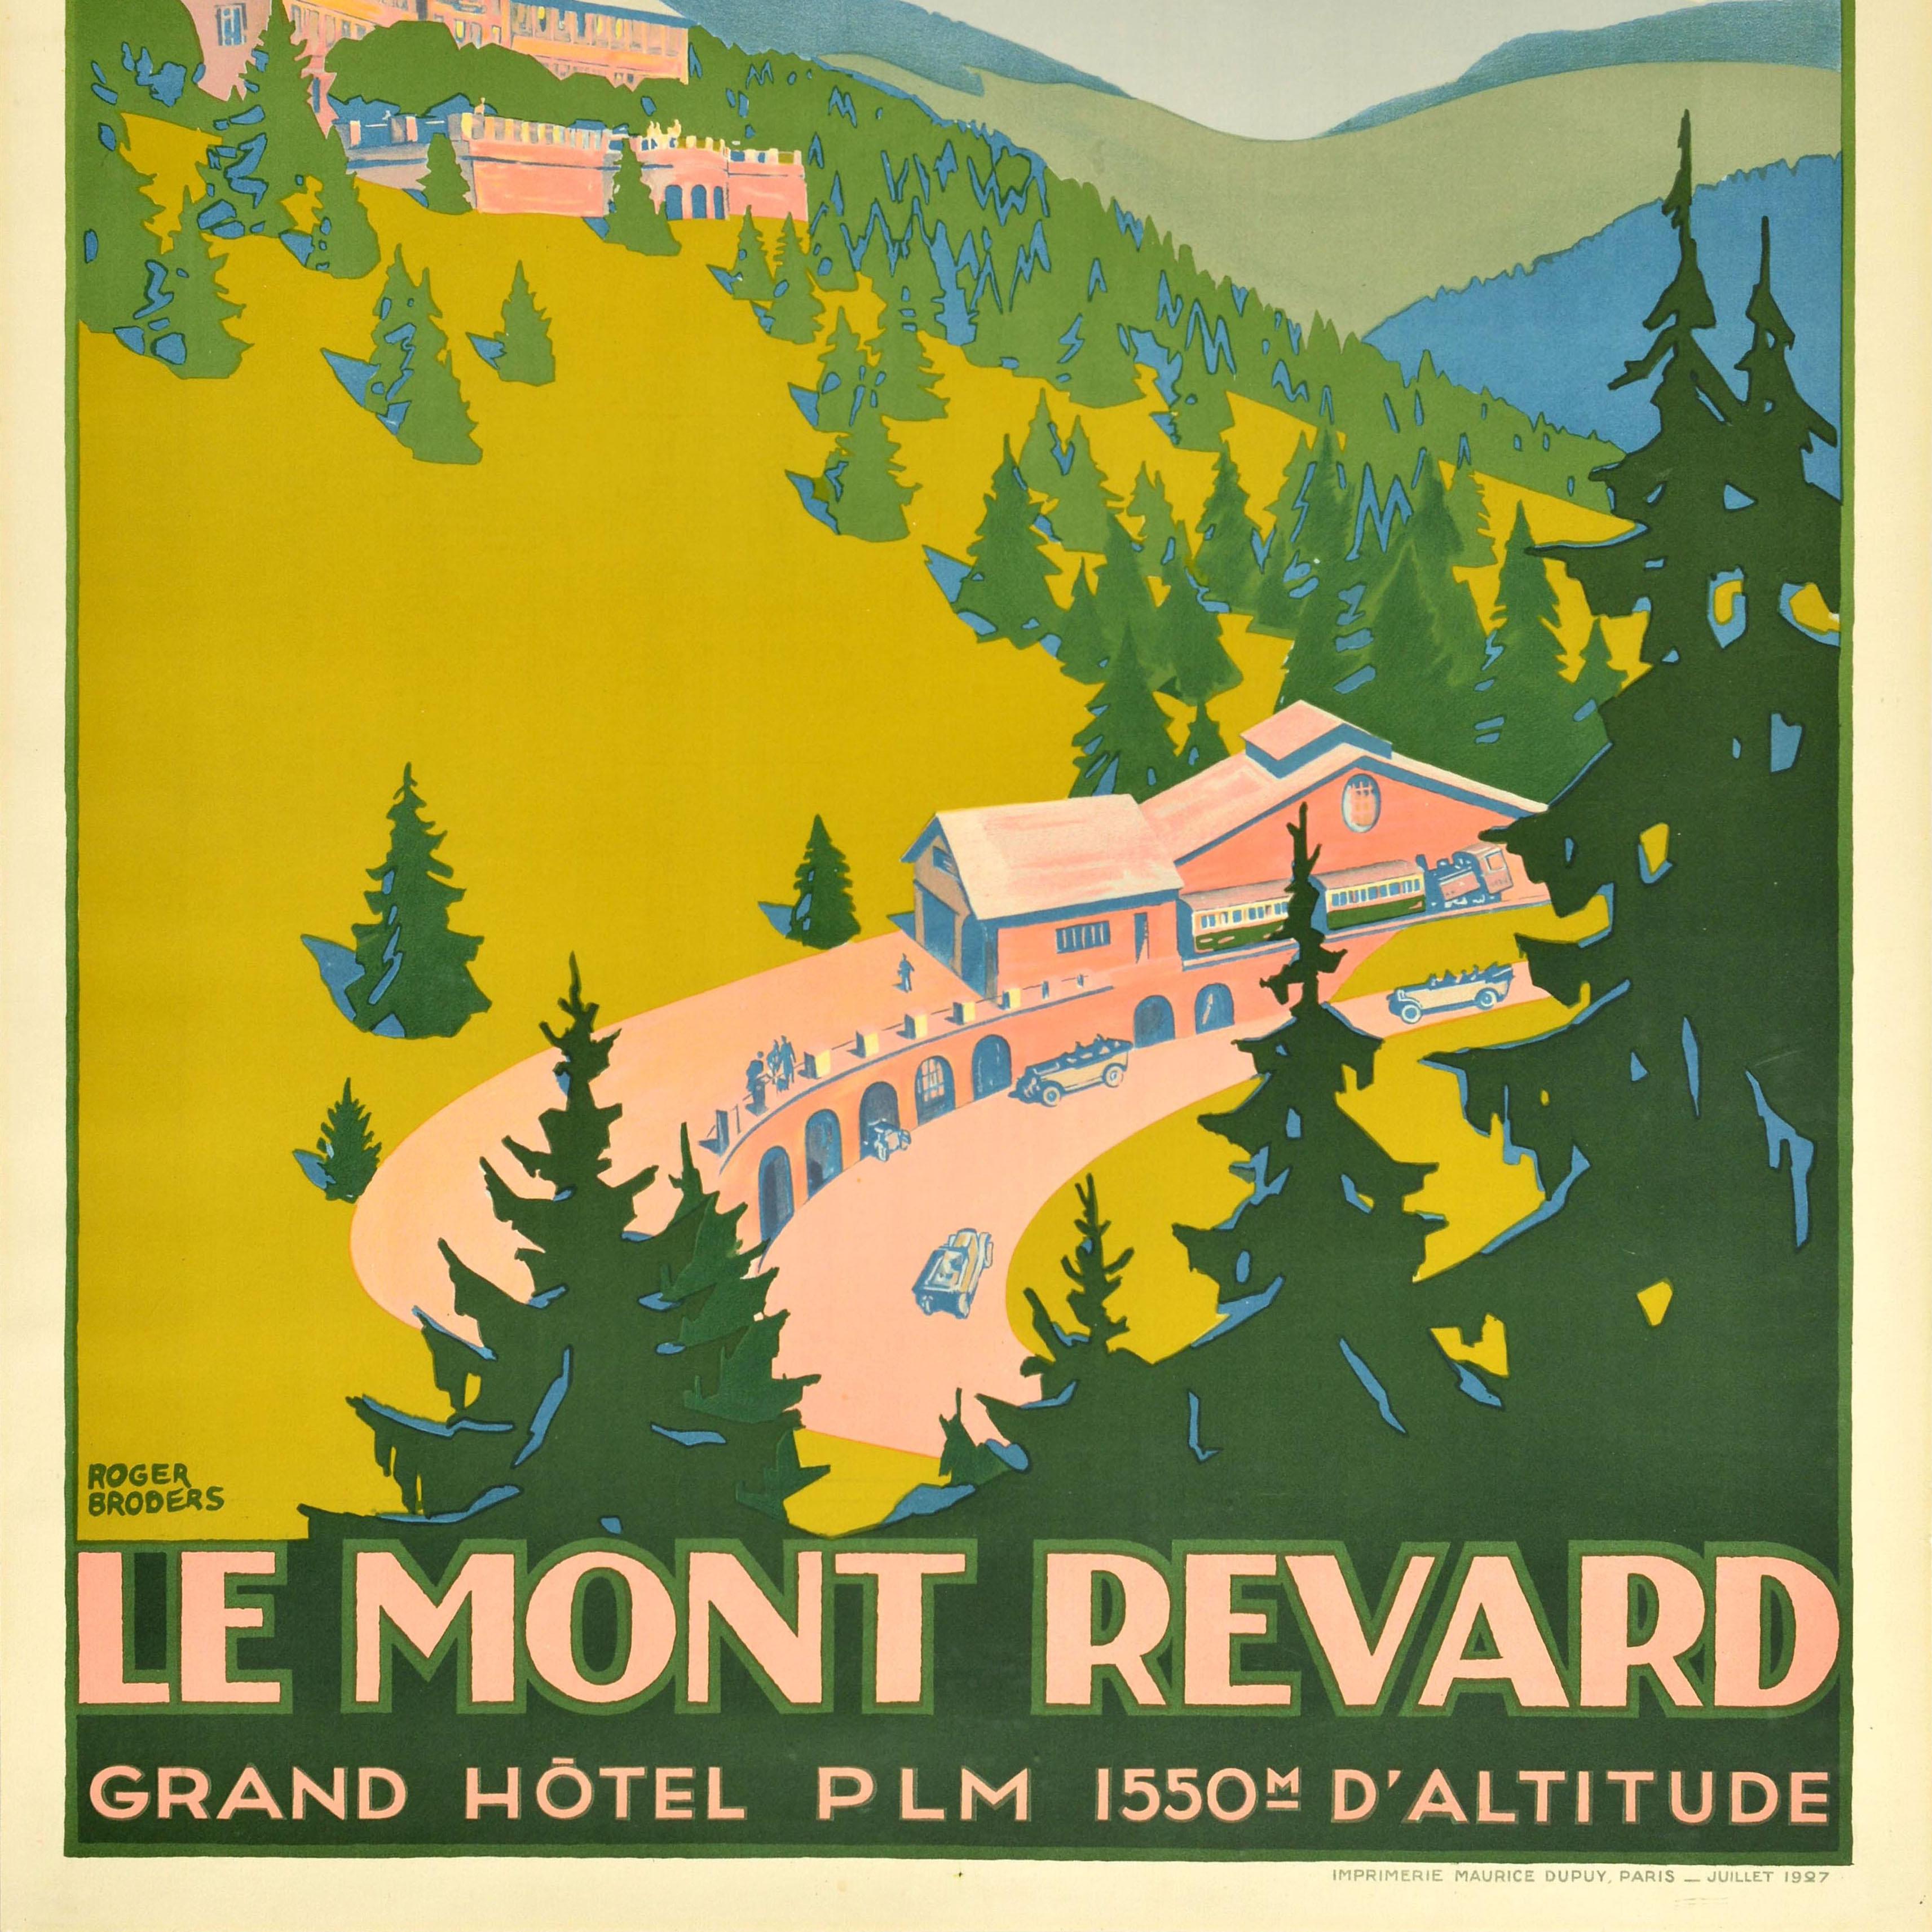 Original Vintage Travel Poster Le Mont Revard Grand Hotel PLM Roger Broders In Excellent Condition For Sale In London, GB